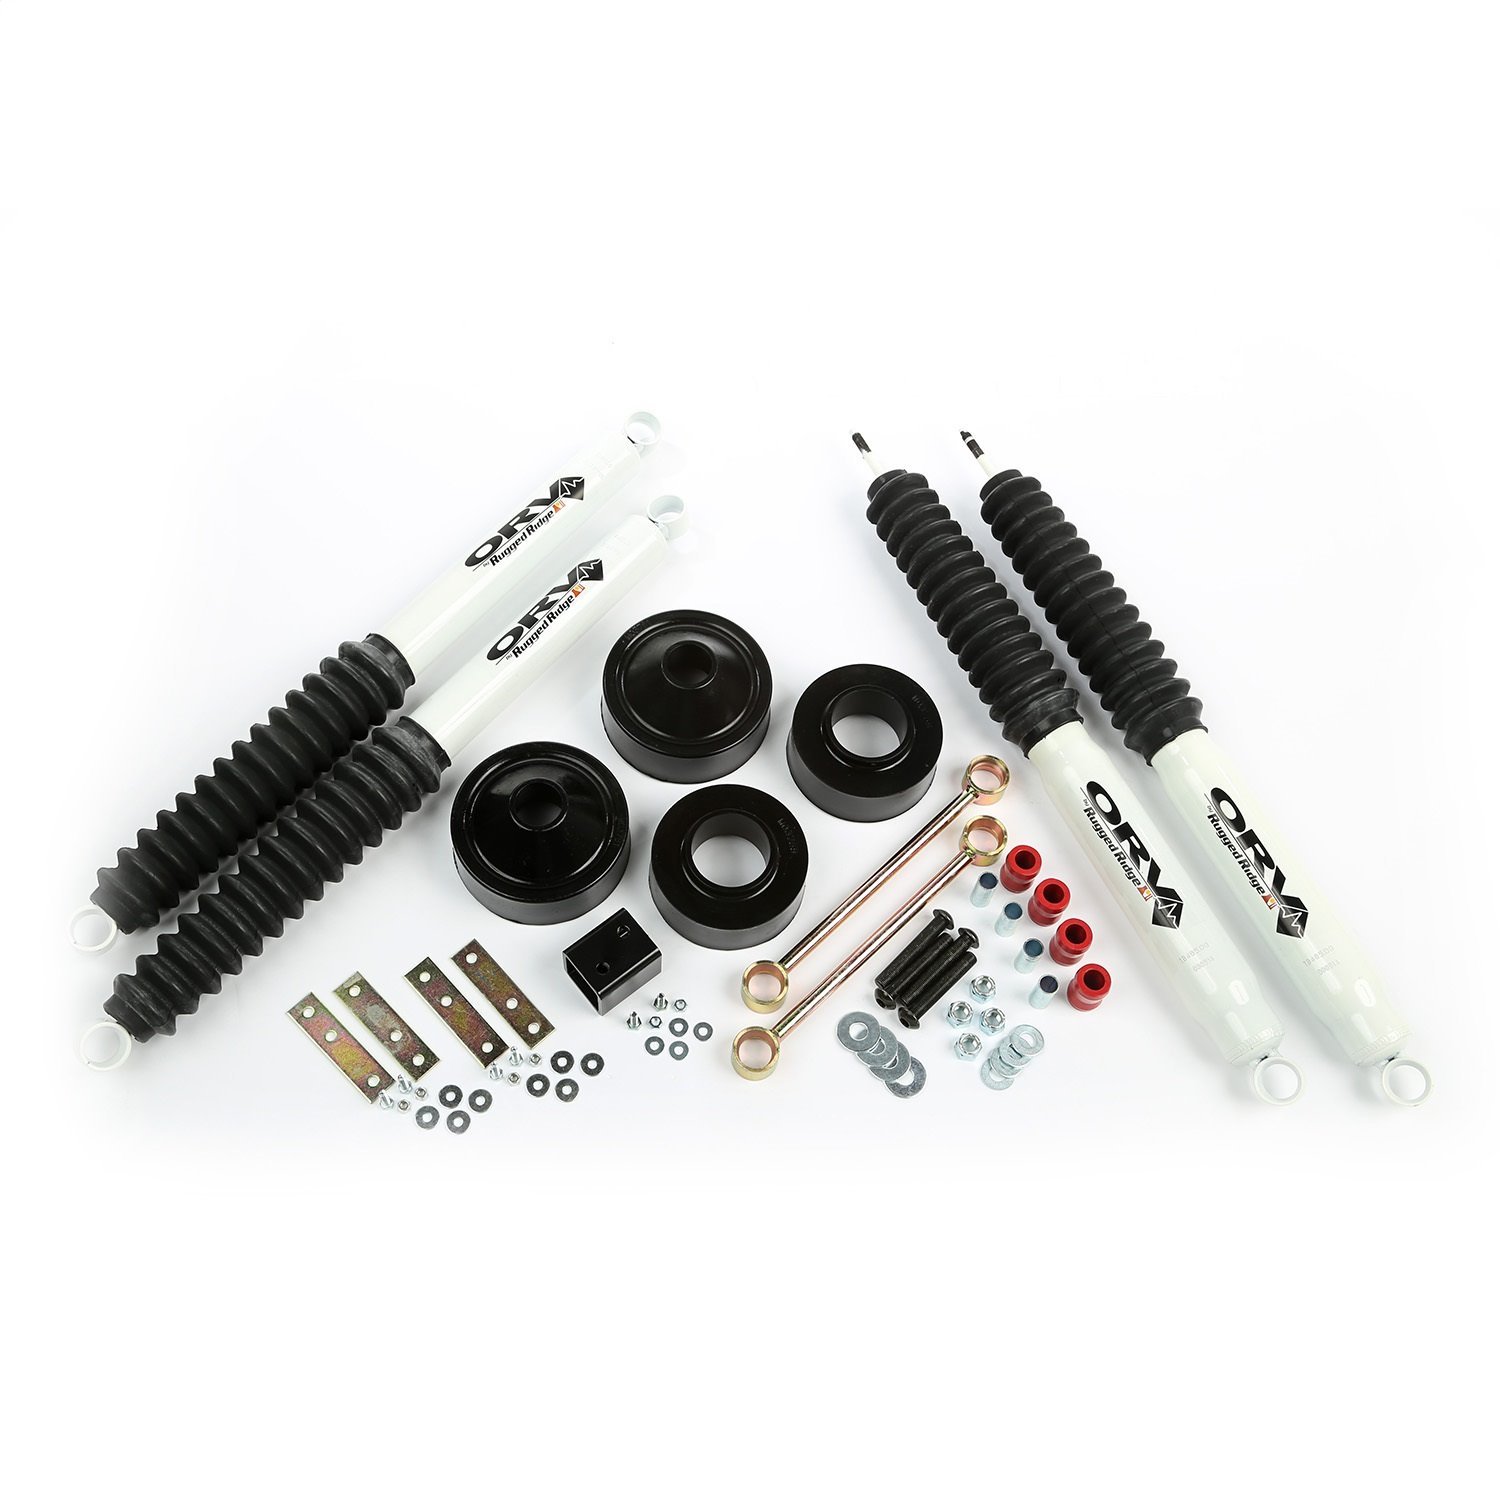 18360.22 Front and Rear Suspension Lift Kit, Lift Amount: 1.75 in. Front/1.75 in. Rear